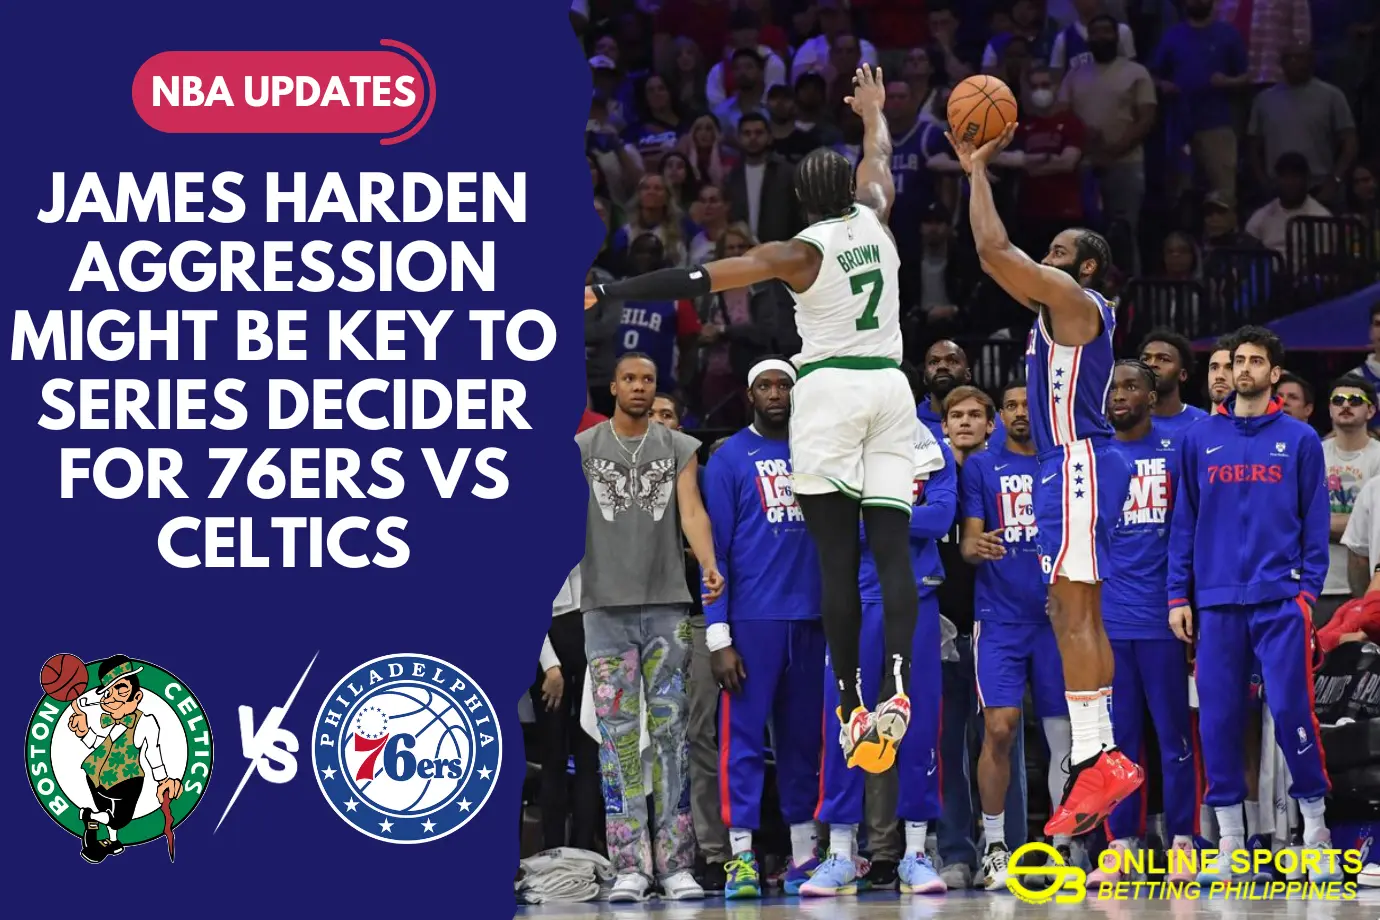 James Harden Aggression Might Be Key to Series Decider for 76ERS vs Celtics